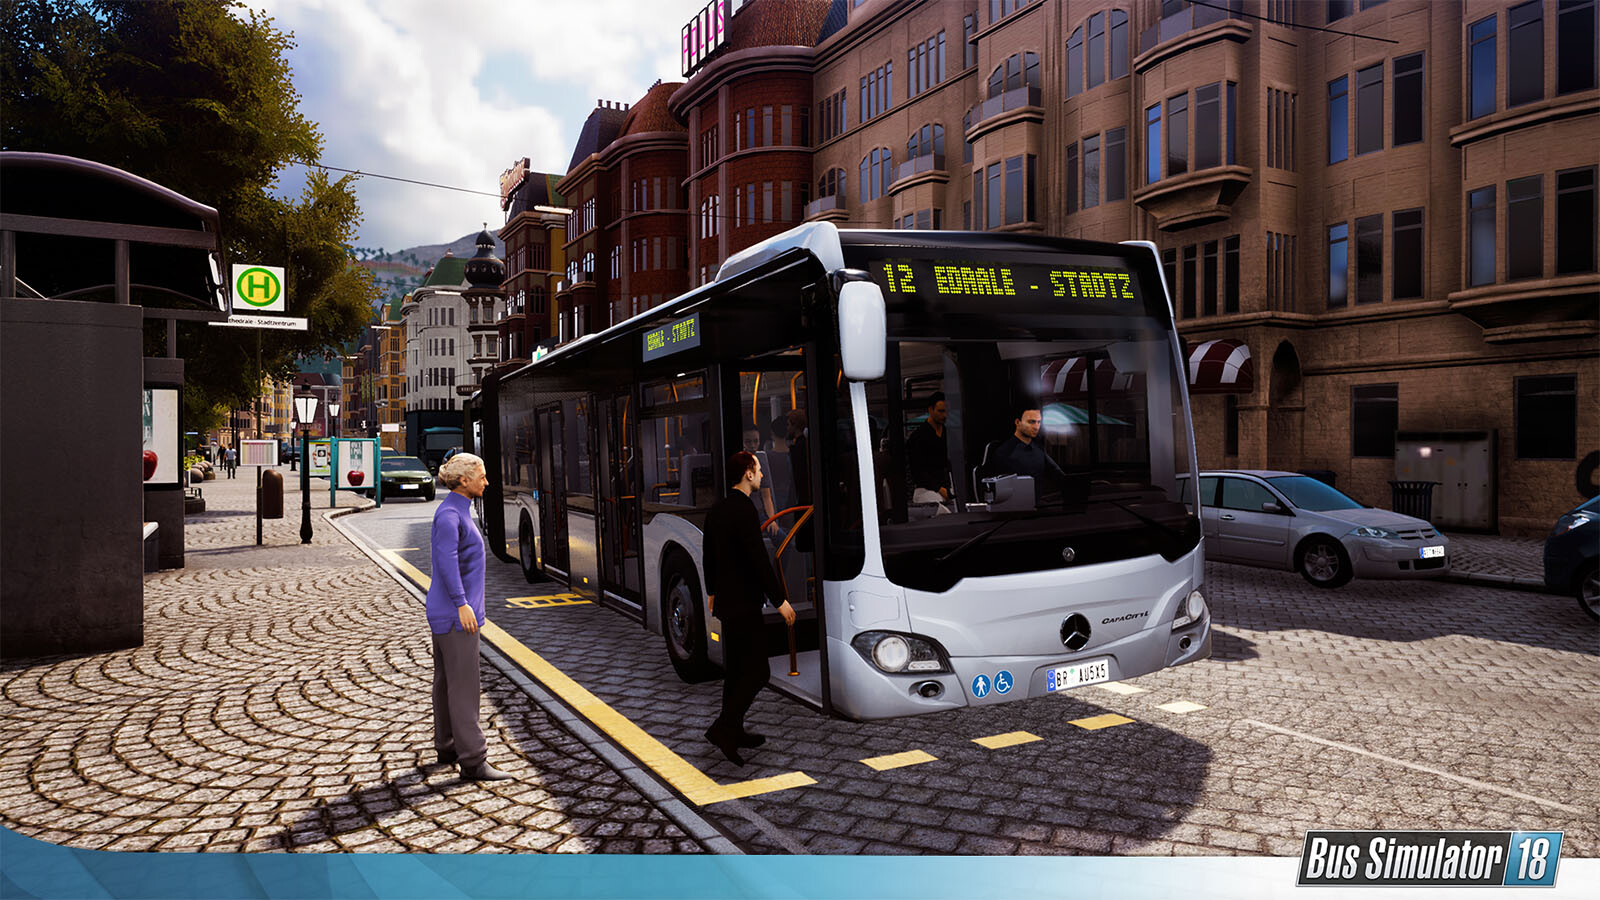 how to start a bus in bus simulator 18